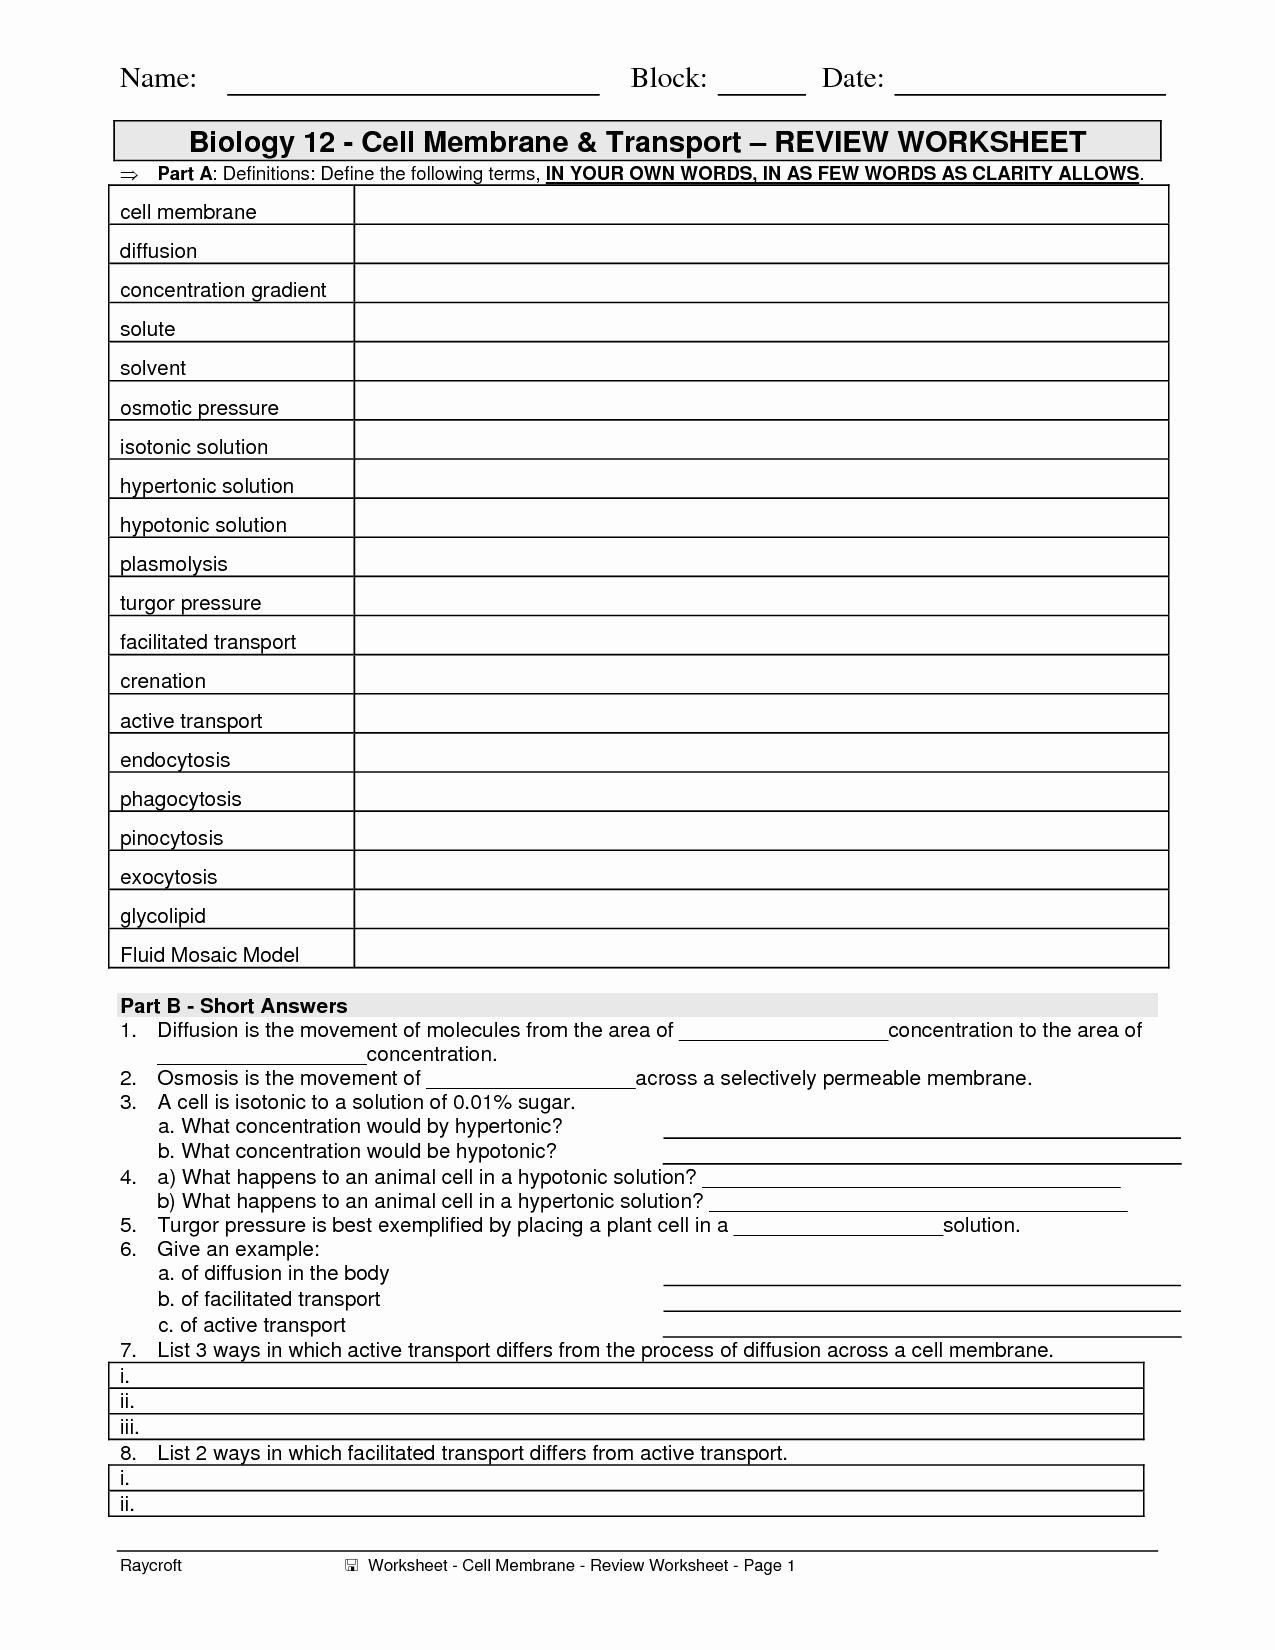 Active and Passive Transport Worksheet Awesome 43 Passive and Active Transport Worksheet Uncategorized